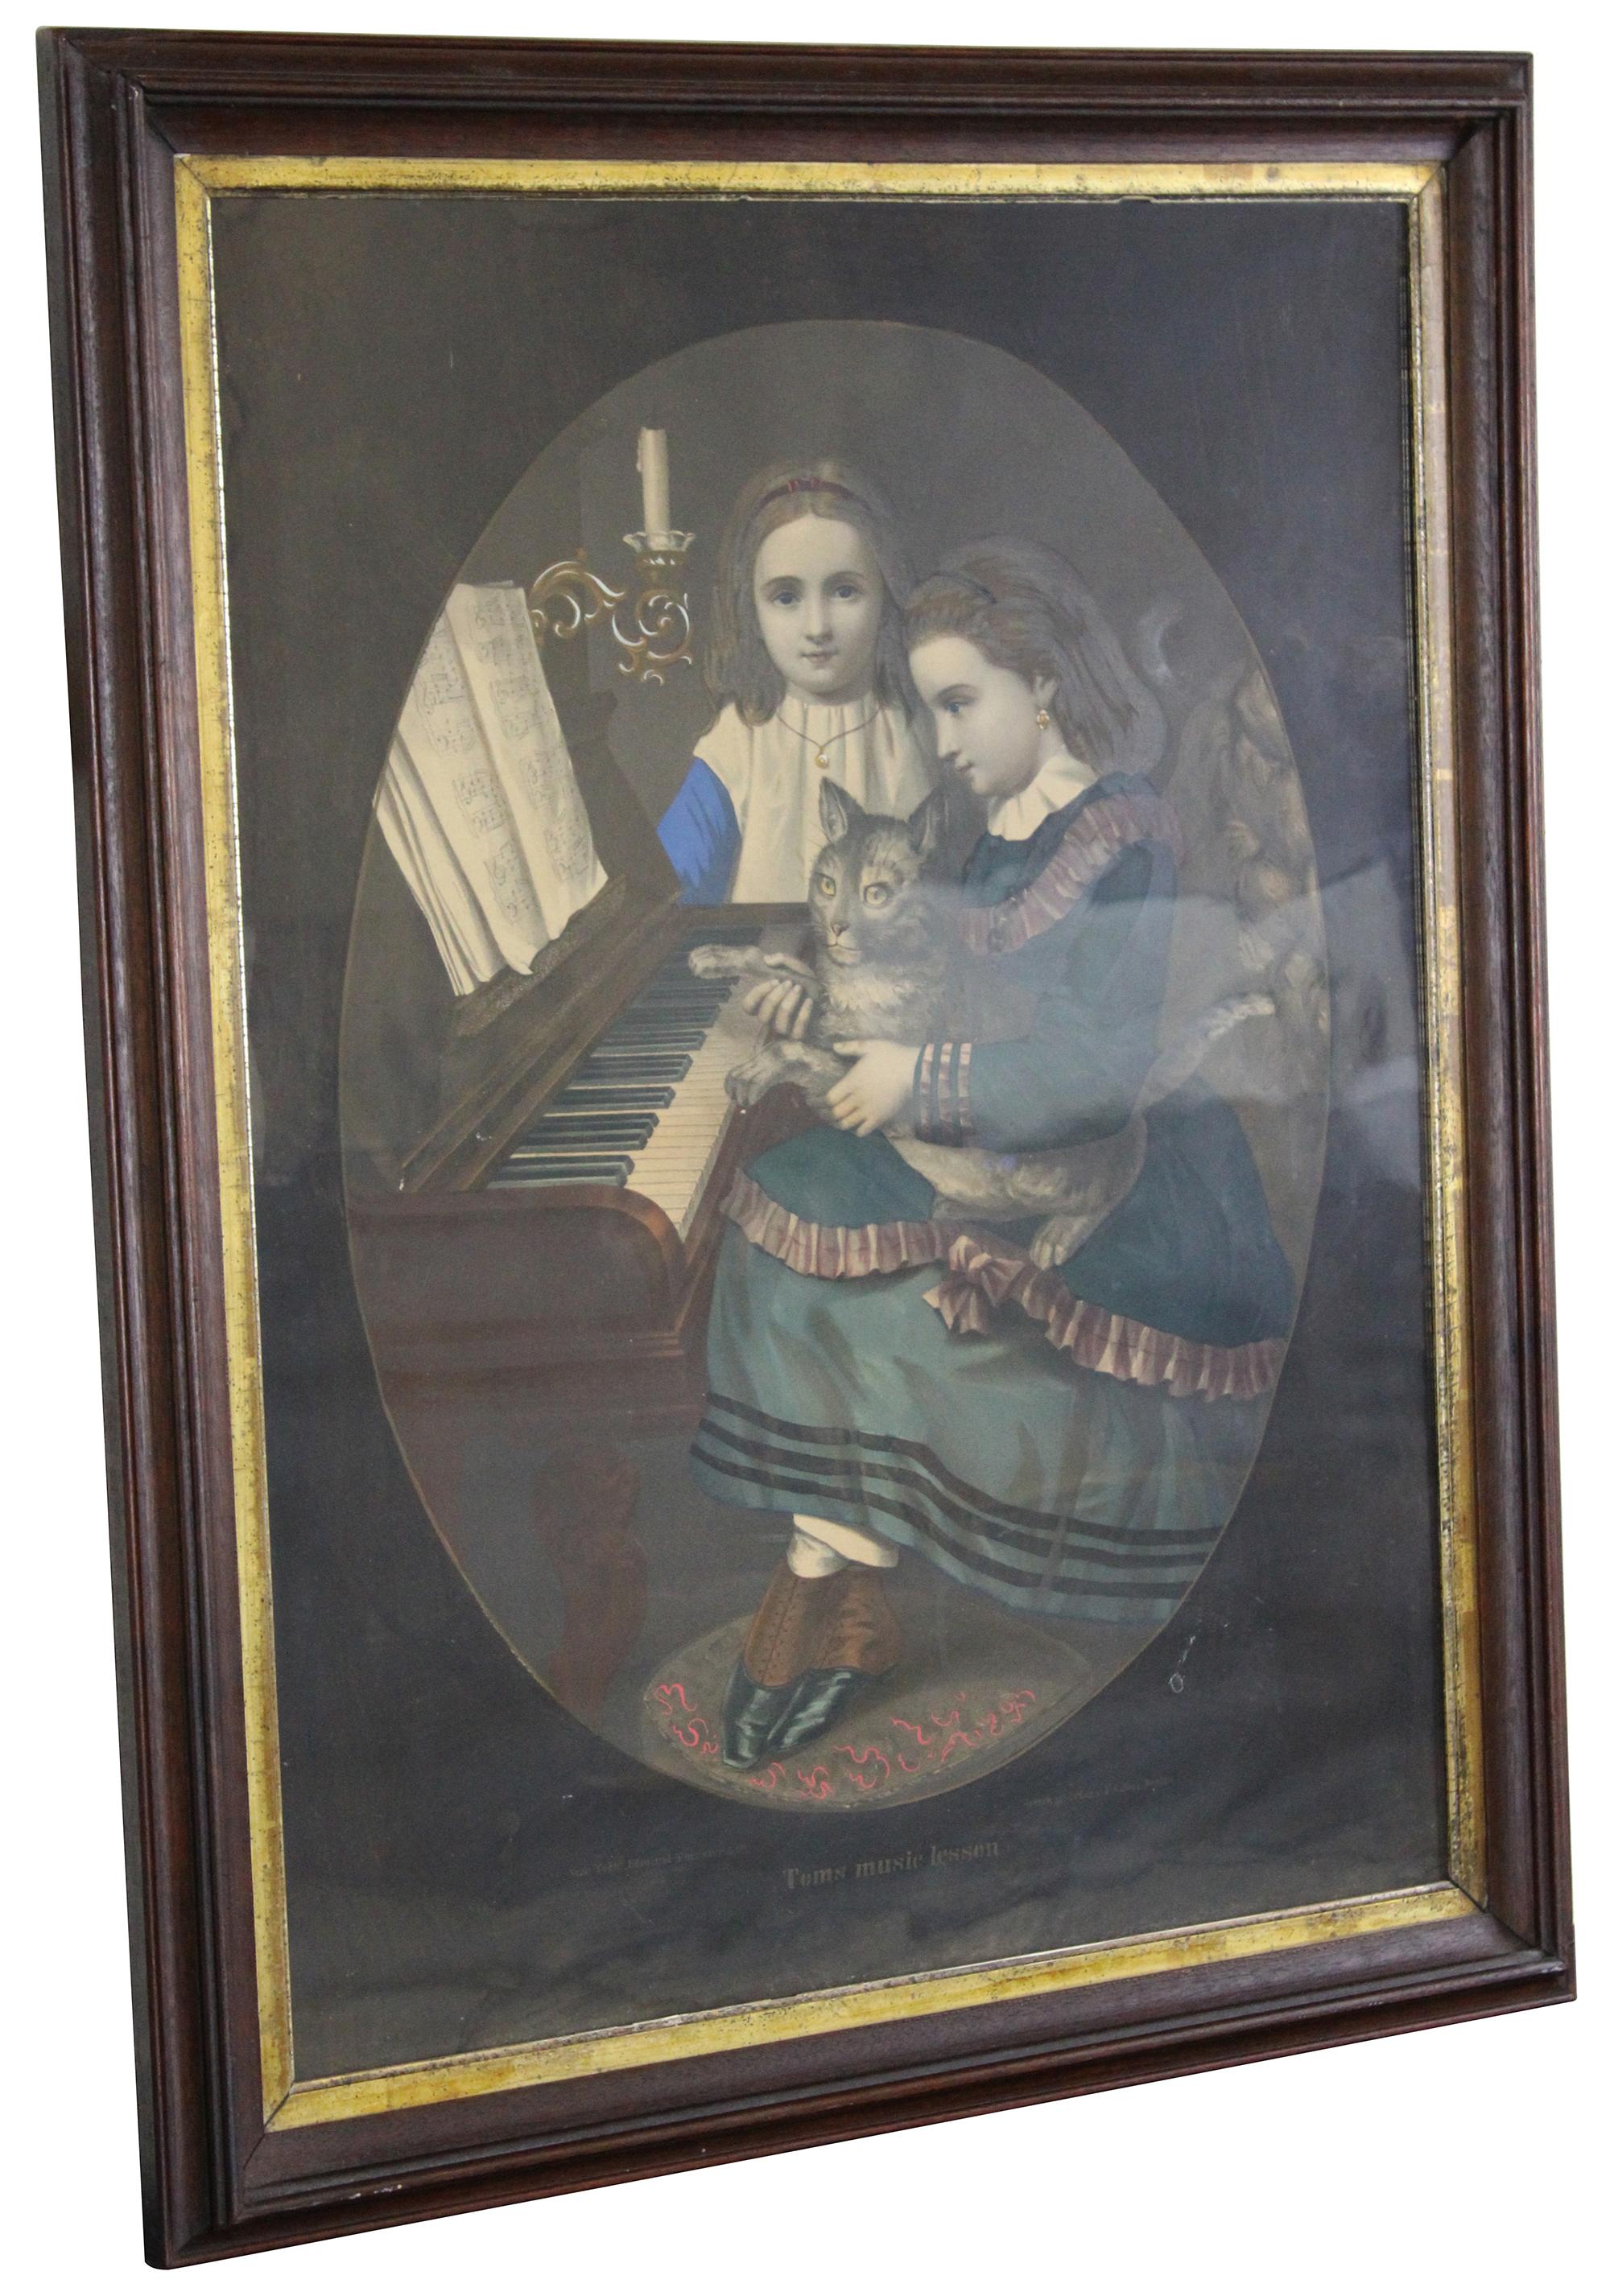 Antique Toms Music Lesson oval painted colored lithograph print by F. Silber for Edmund Foerster & Co. Features two Victorian clad girls / sisters at the piano with their cat. Framed in period antique gold gilt and mahogany frame with antique glass.